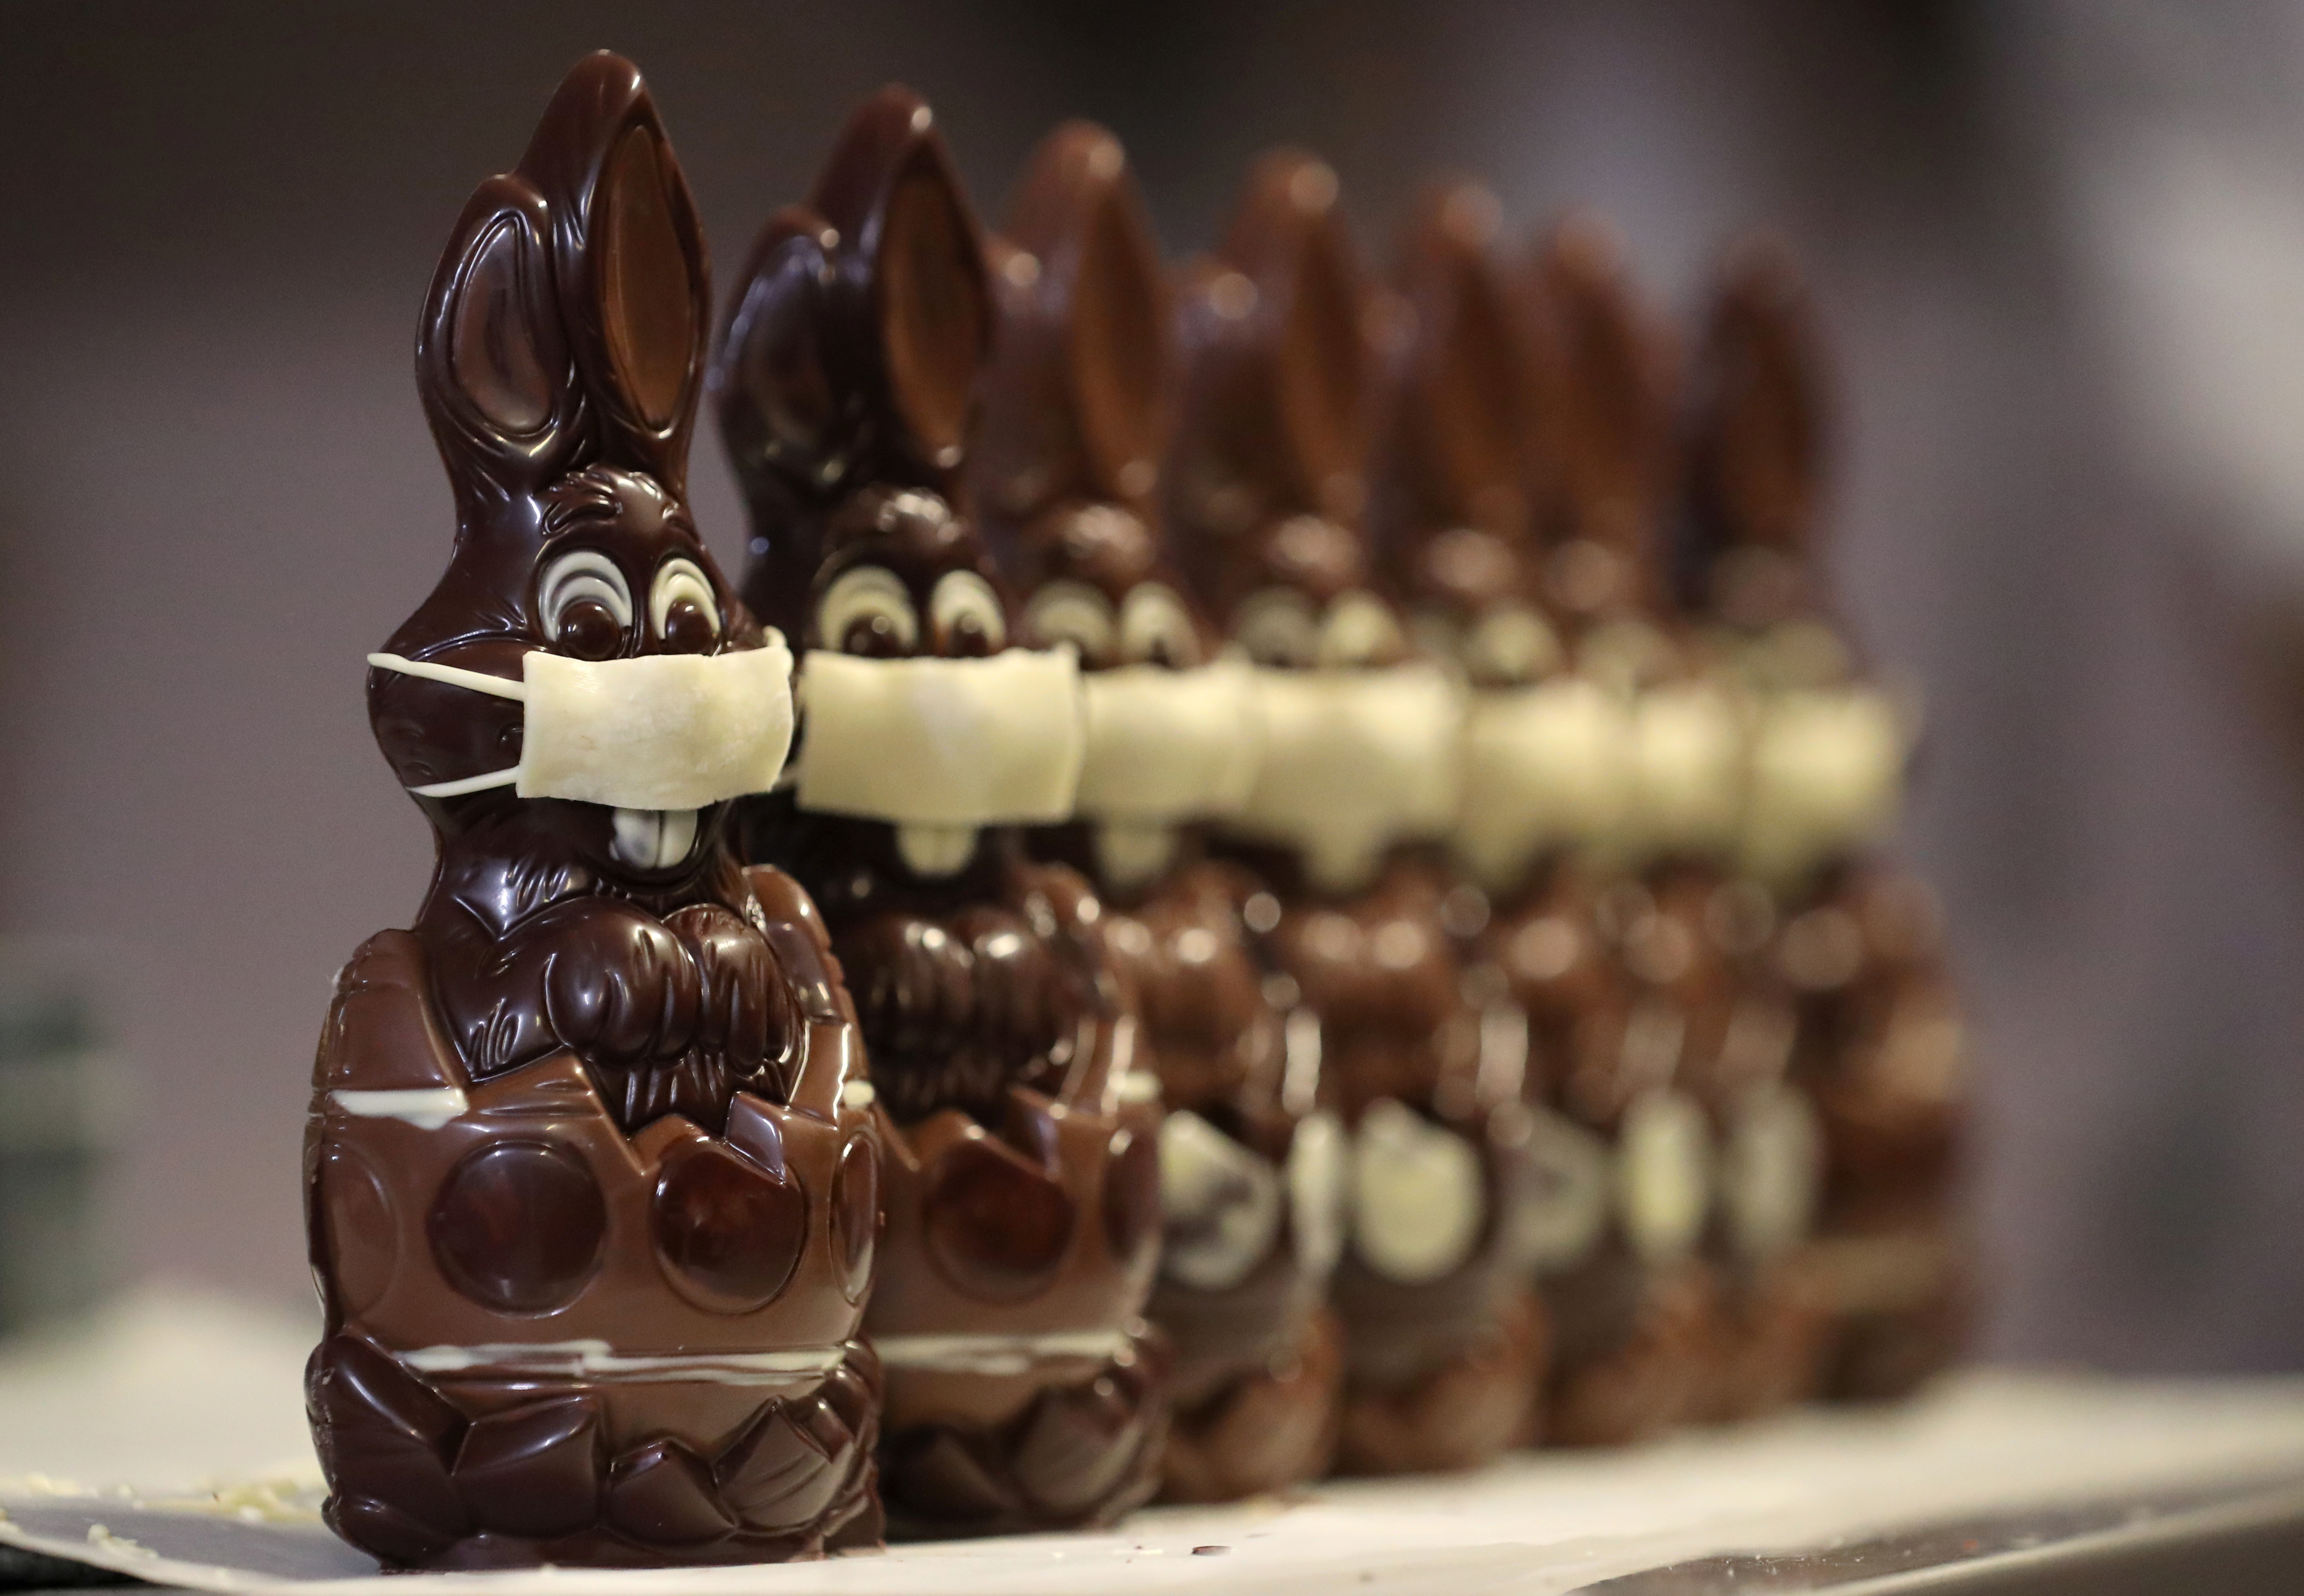 Not just people, chocolate Easter bunnies need to wear masks in Belgium too